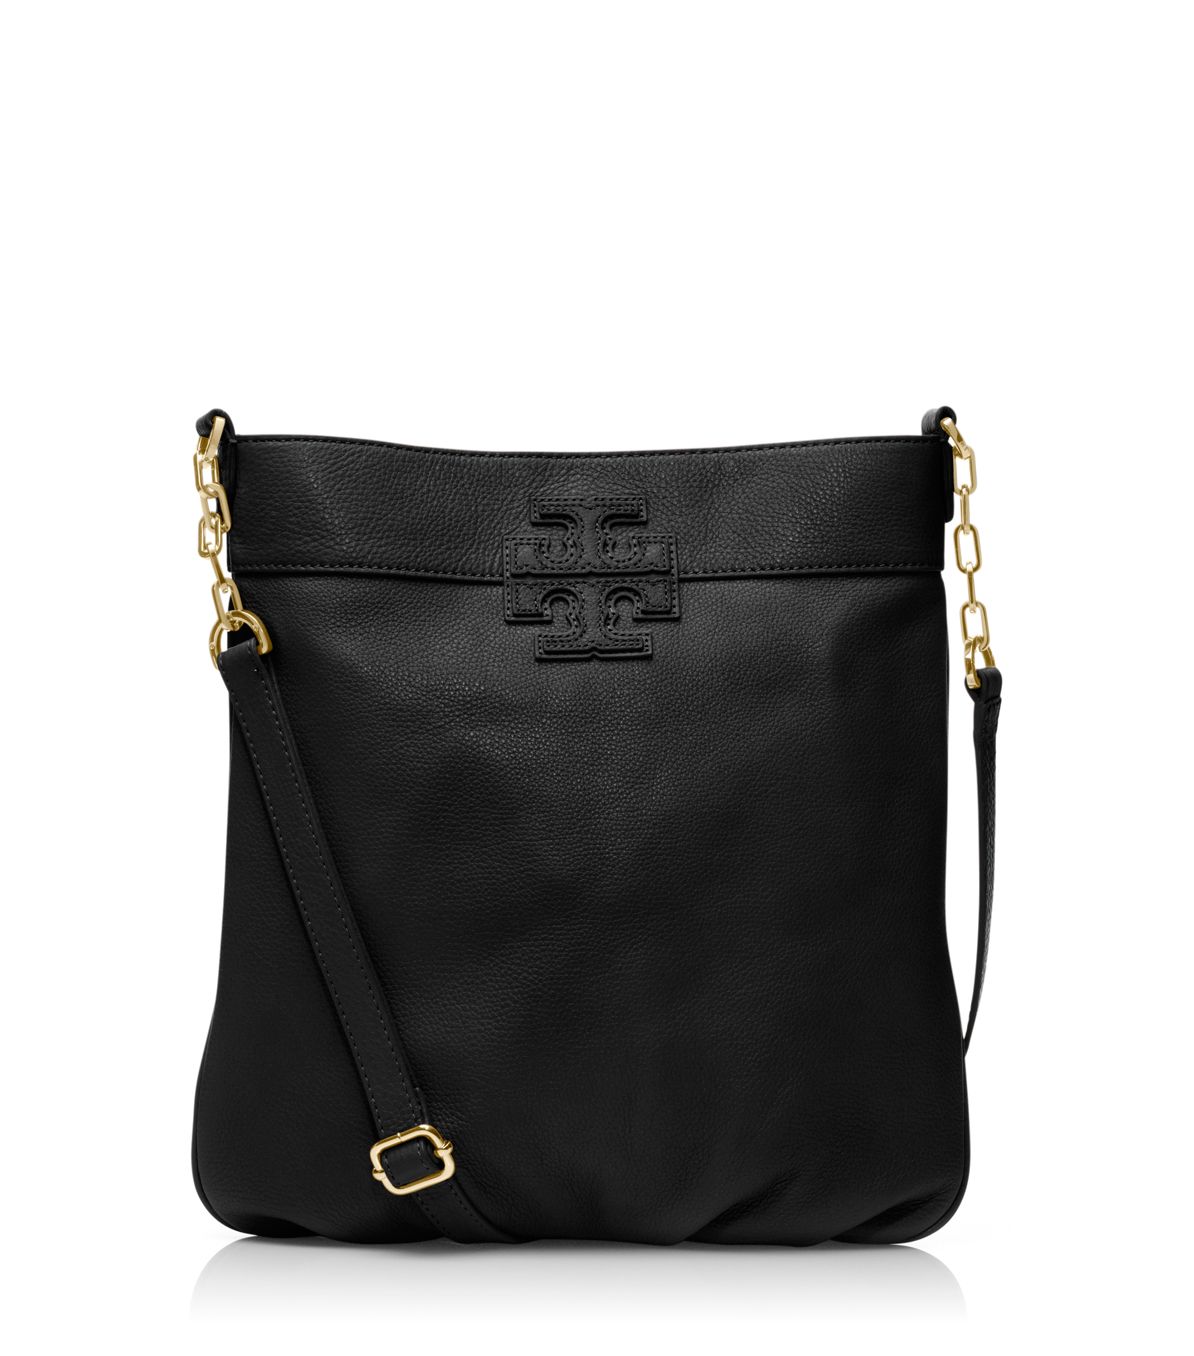 Tory Burch Stacked T Leather Book Bag in Black | Lyst